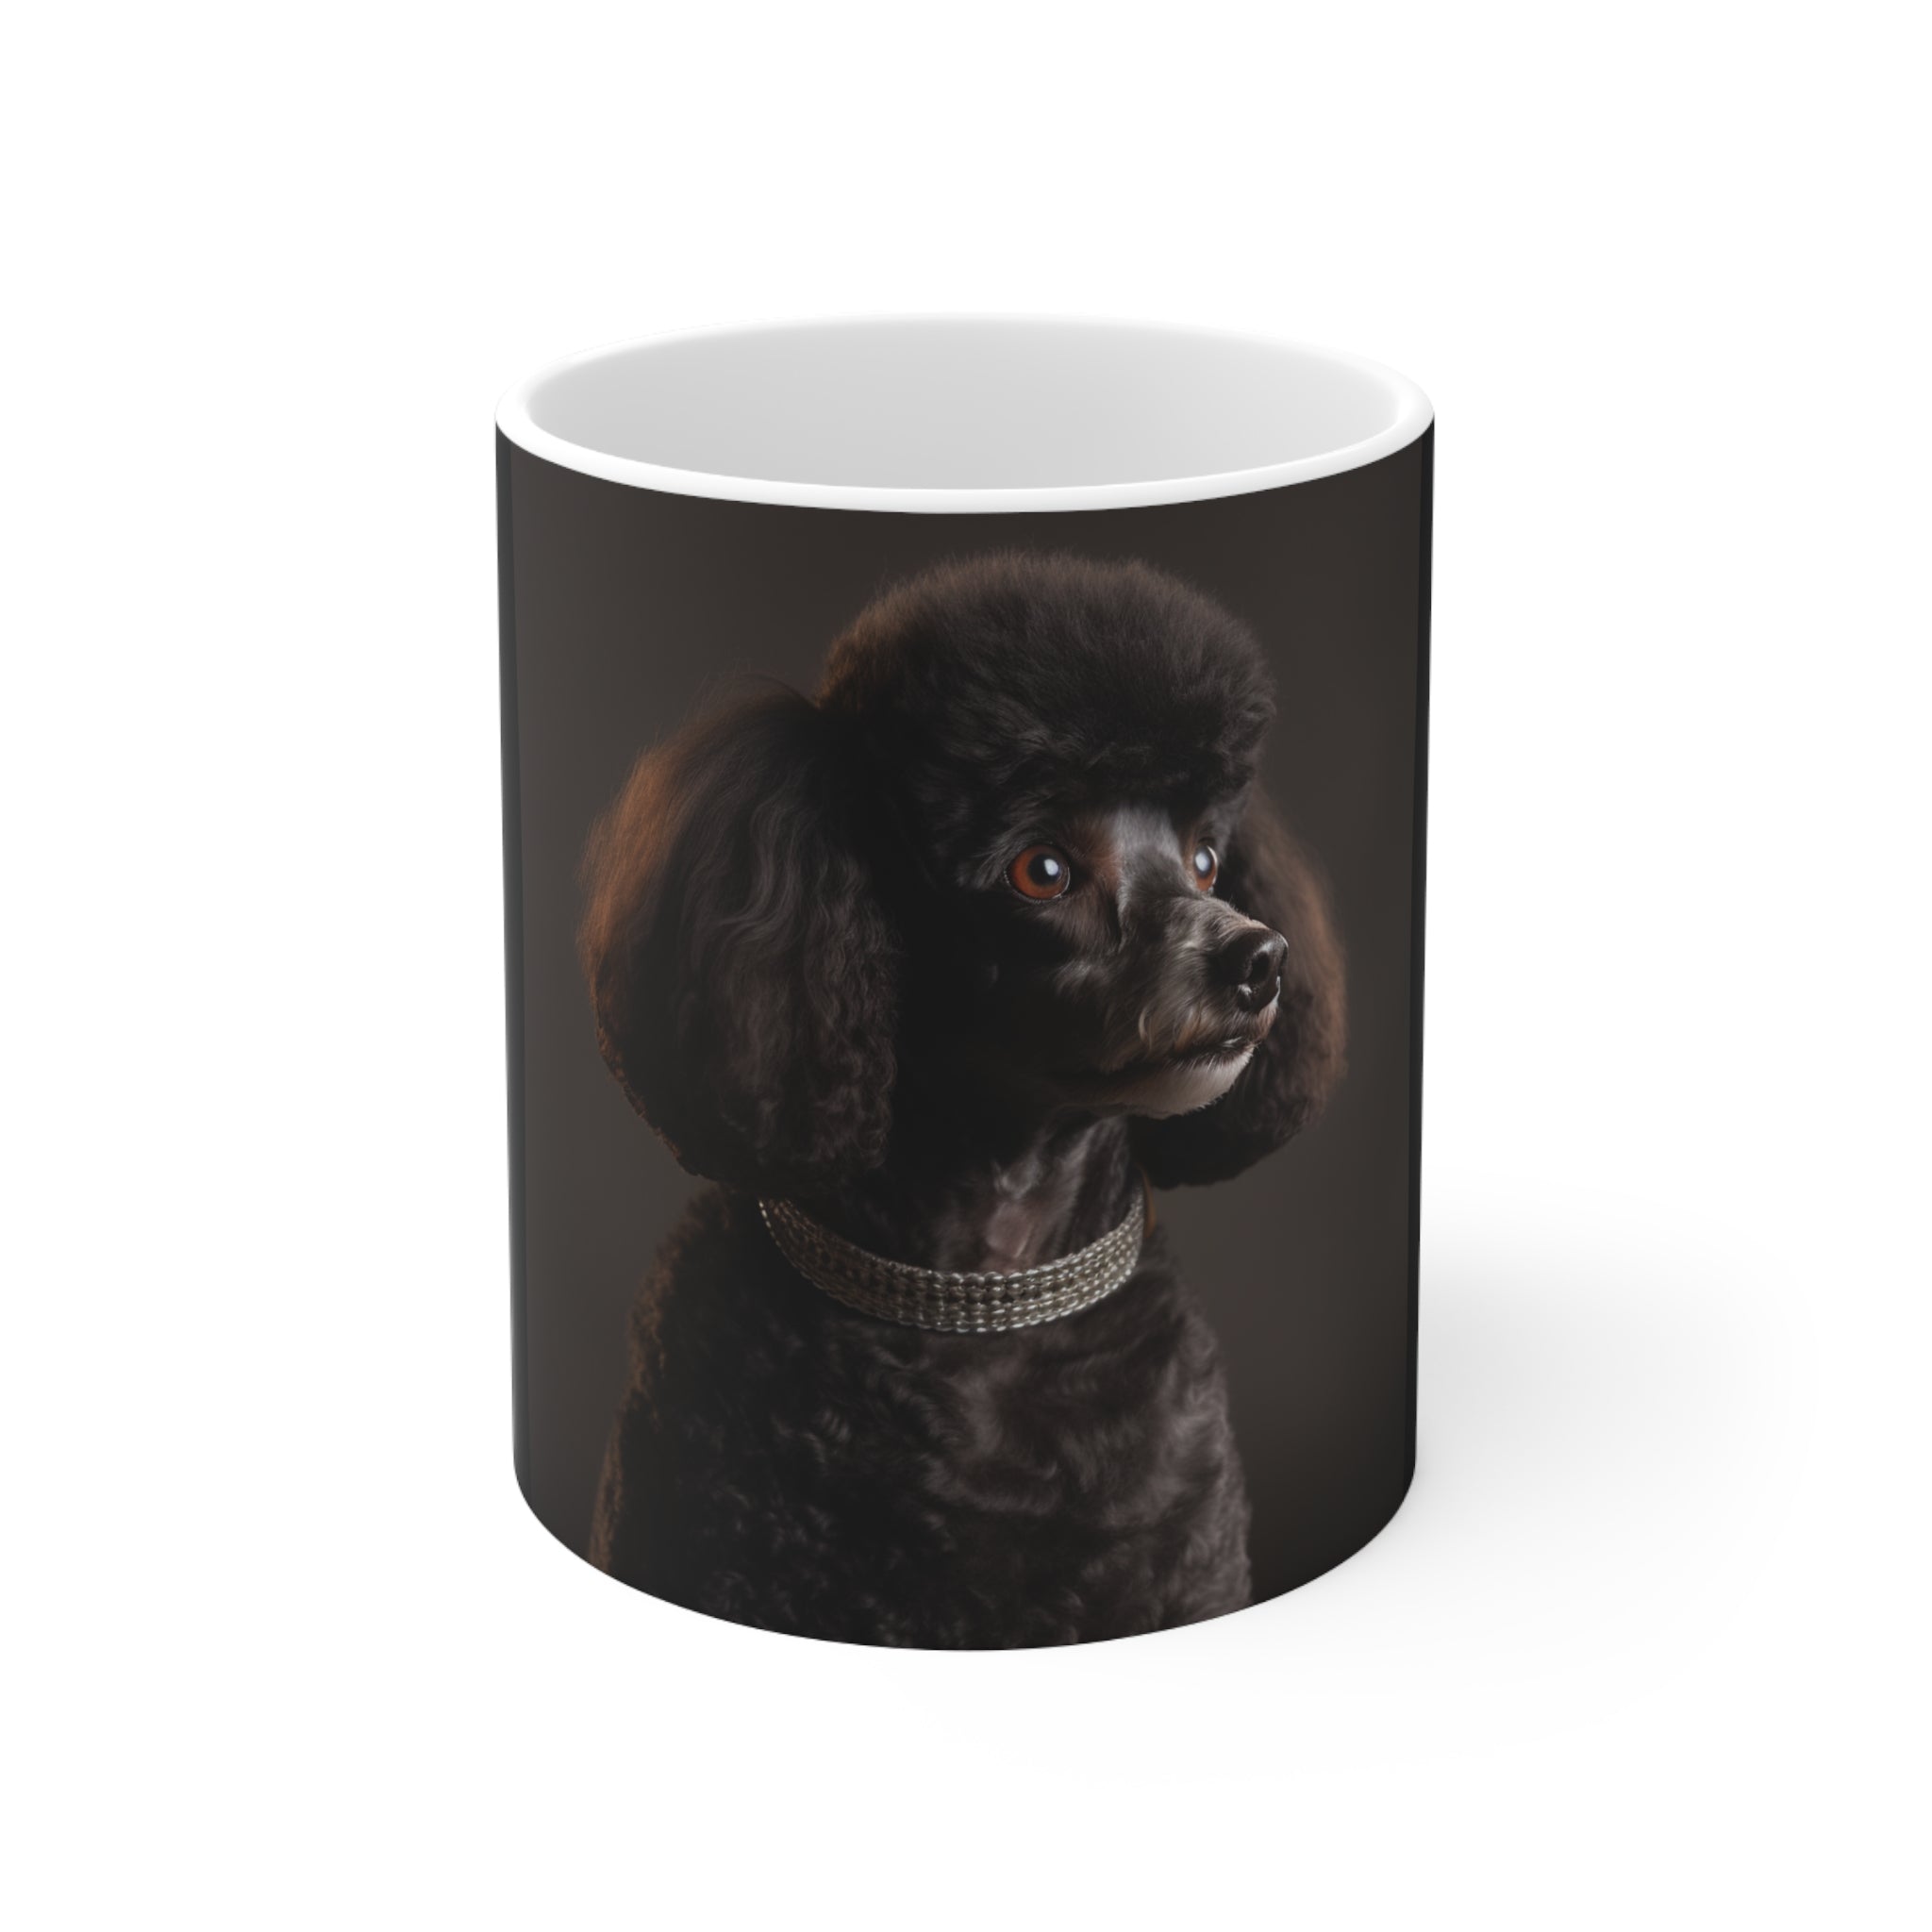 Poodle Owner Furry Friend Dog Photo Ceramic Mug 11oz - Personalized Pet Mug for Dog Lovers | Cherish Your Canine Companion with Every Sip